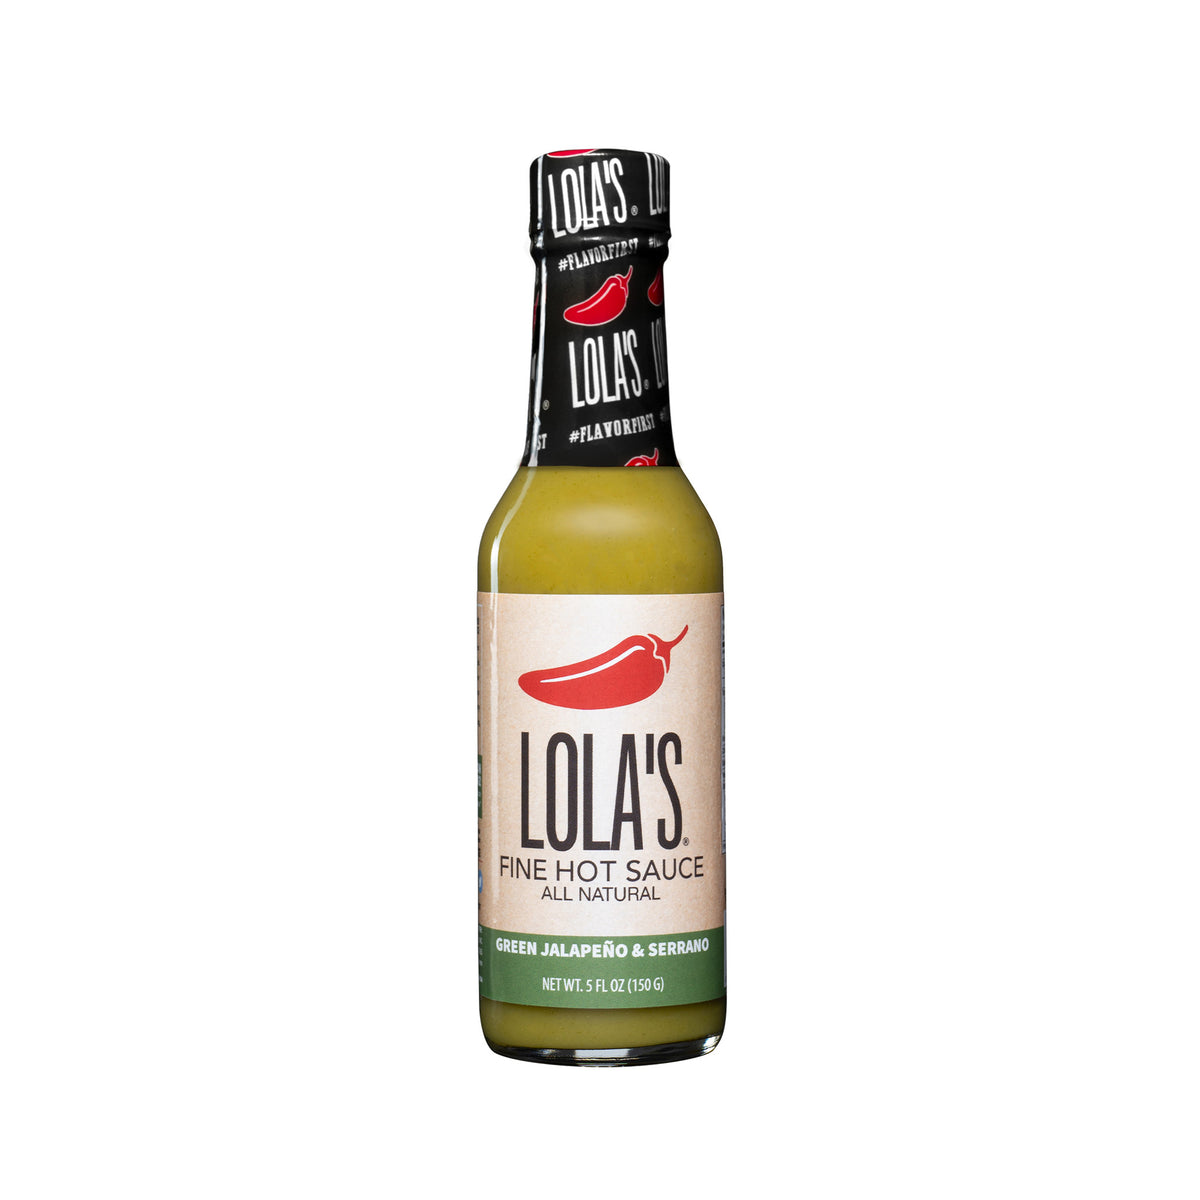 Lola's "Love & Luck" Hot Sauce 2-Pack: Two 5 oz. glass bottles of flavorful, all-natural, plant-based, keto, low sodium, non-GMO, and gluten-free hot sauce.